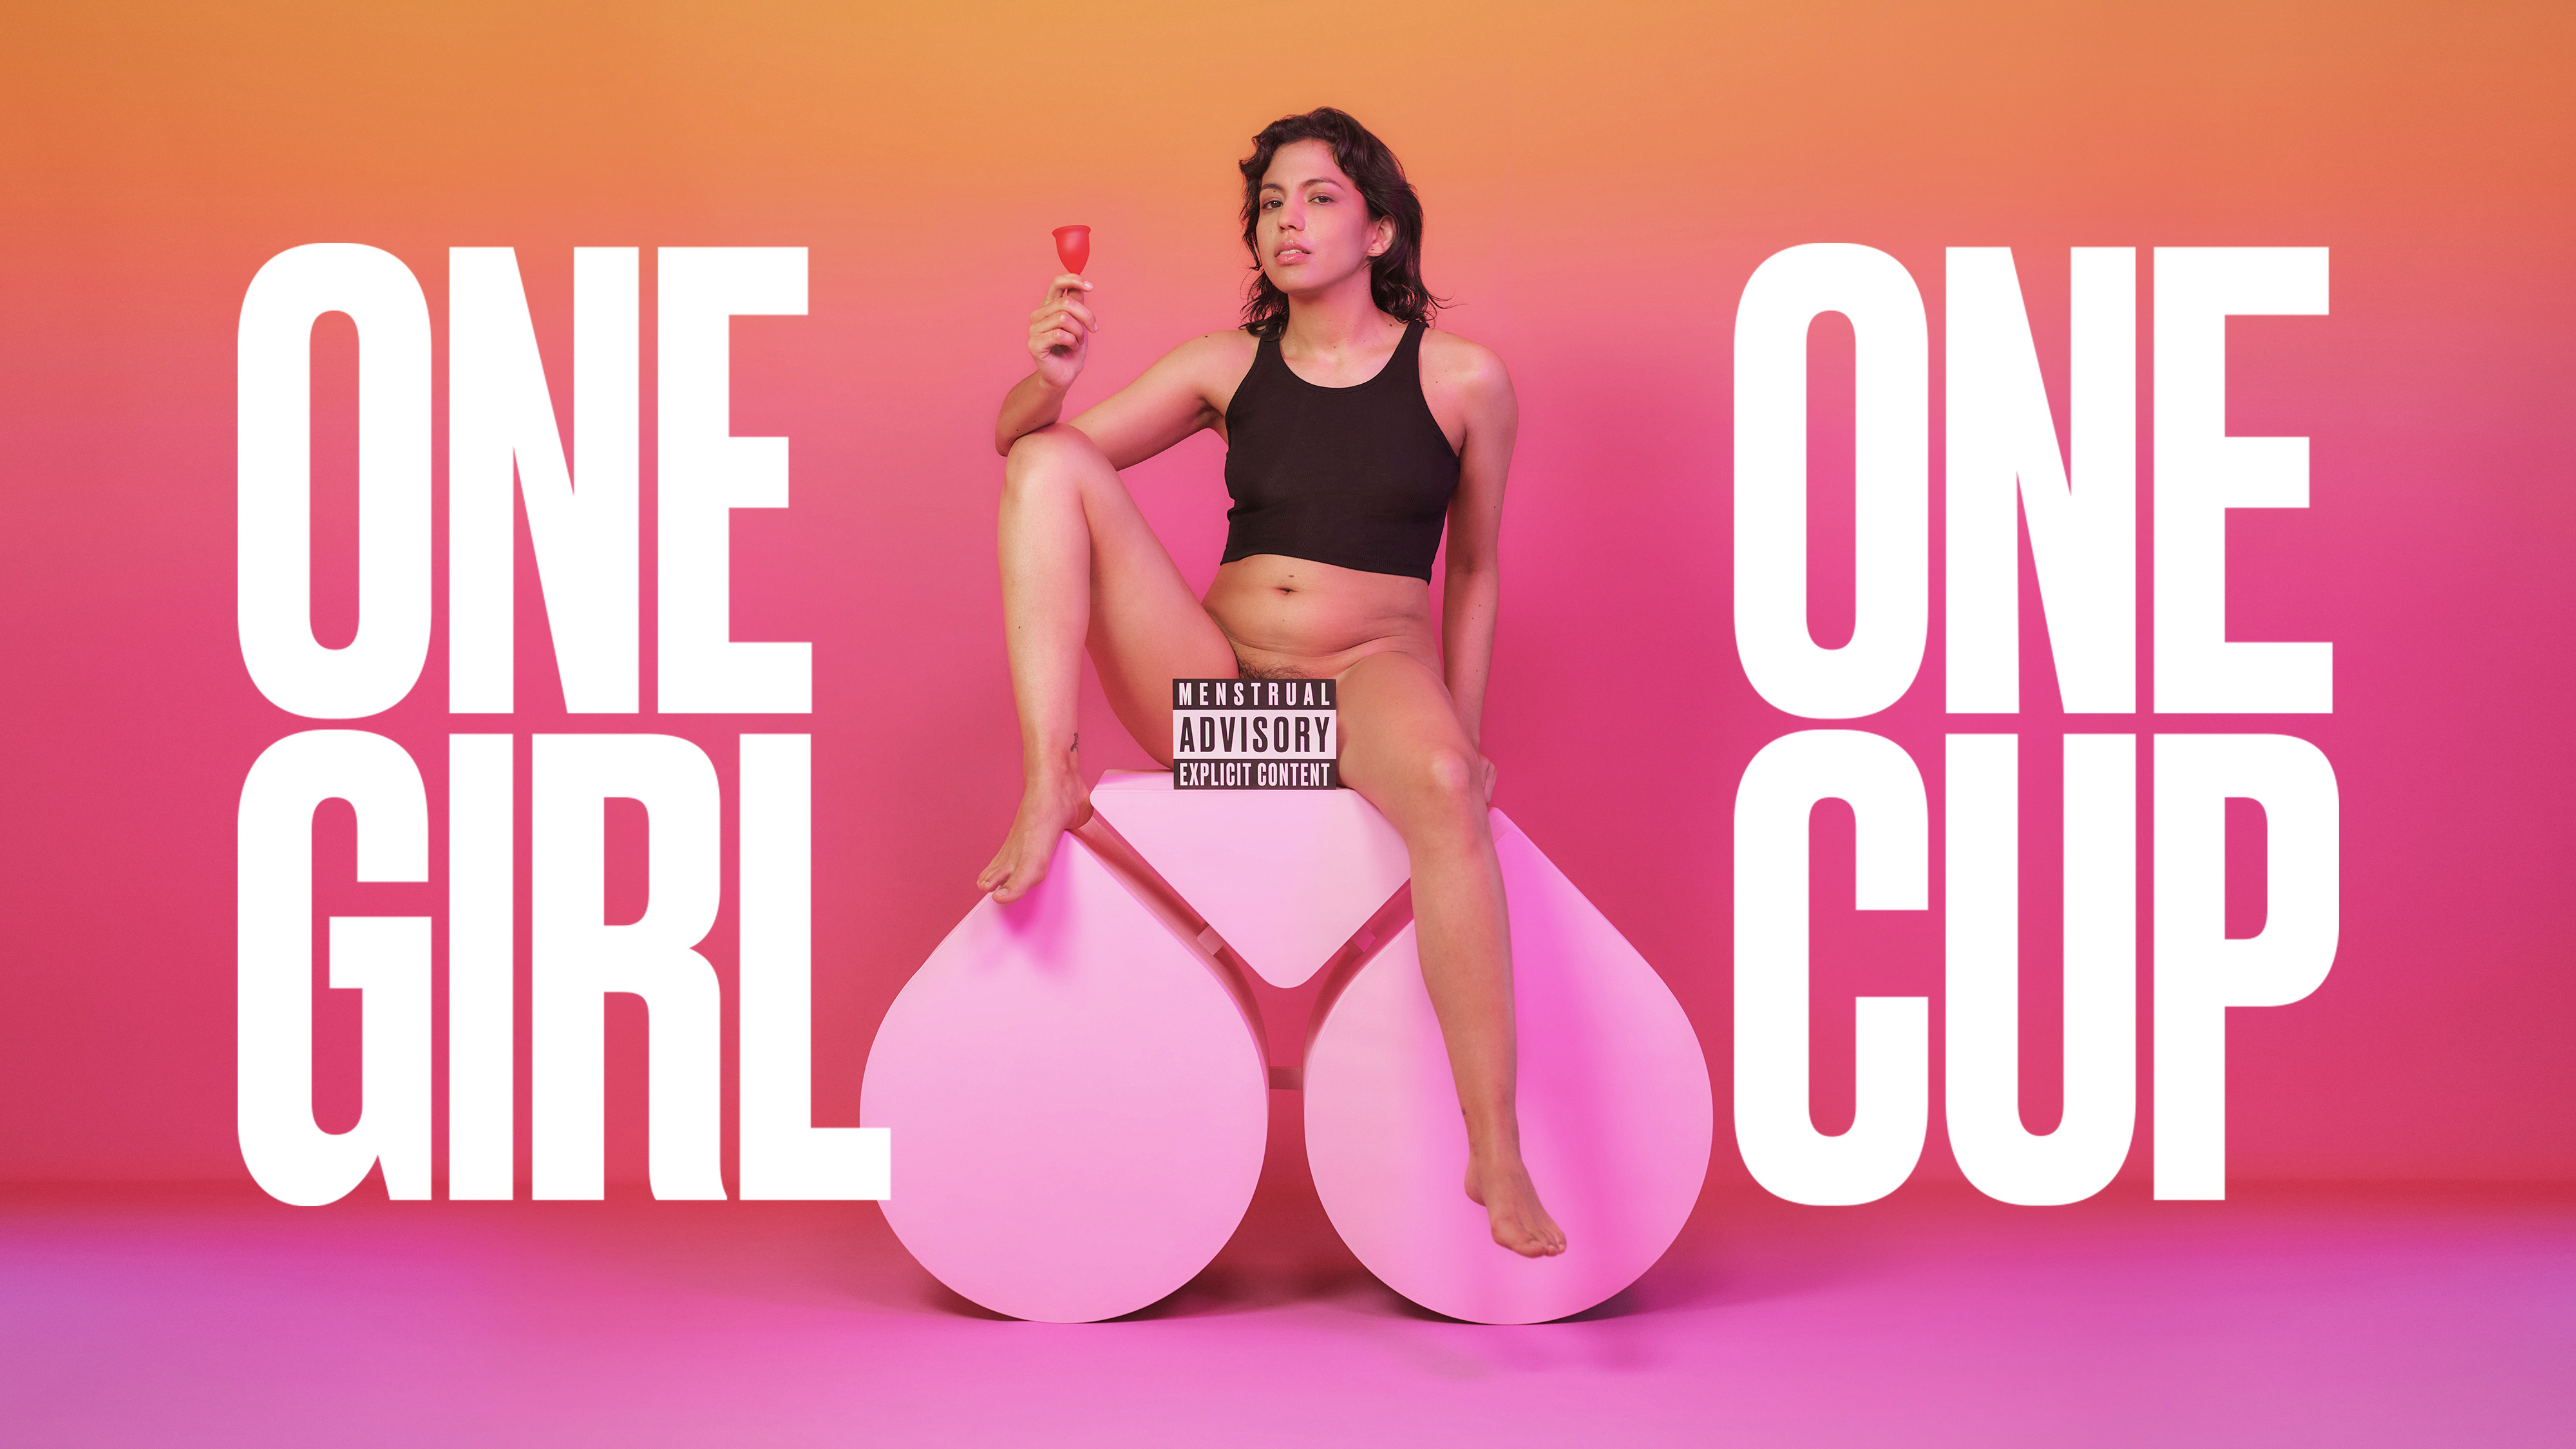 Mensturalcup Inserting Porn - One Girl One Cup â€“ The most explicit tutorial on how to use your menstrual  cup by The Female Company